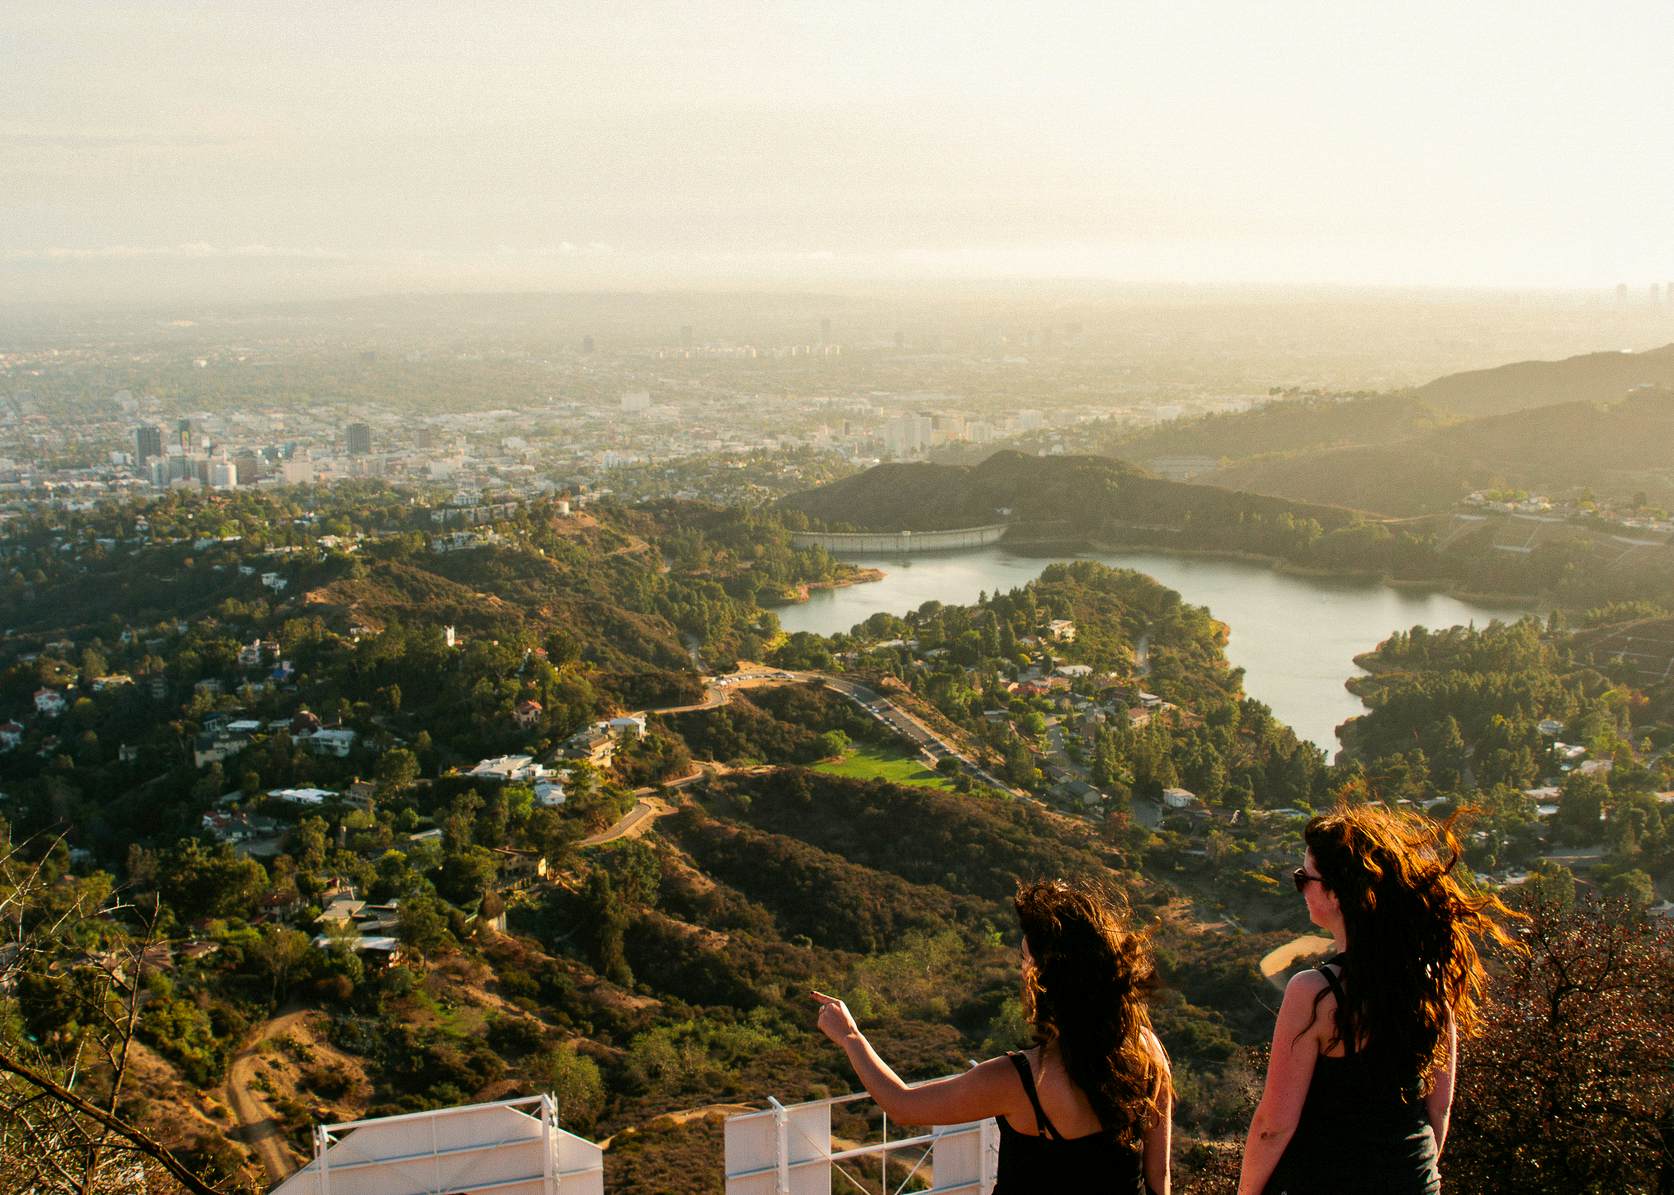 The 8 Best Hollywood Tours